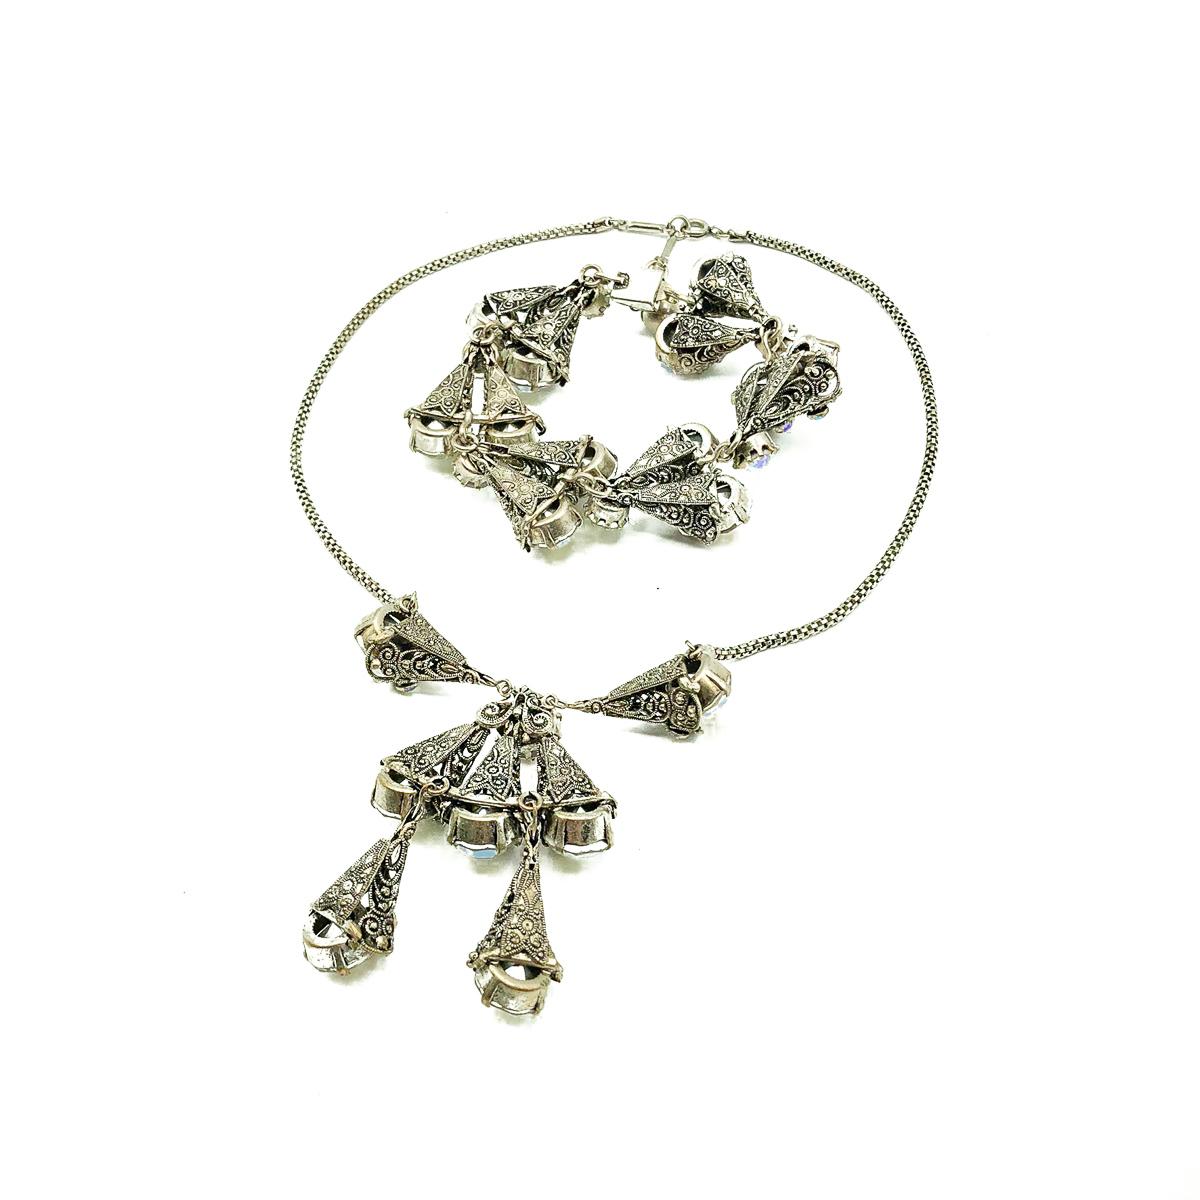 Vintage Silver & Aurora Borealis Crystal Filigree Necklace Suite 1950s In Good Condition For Sale In Wilmslow, GB